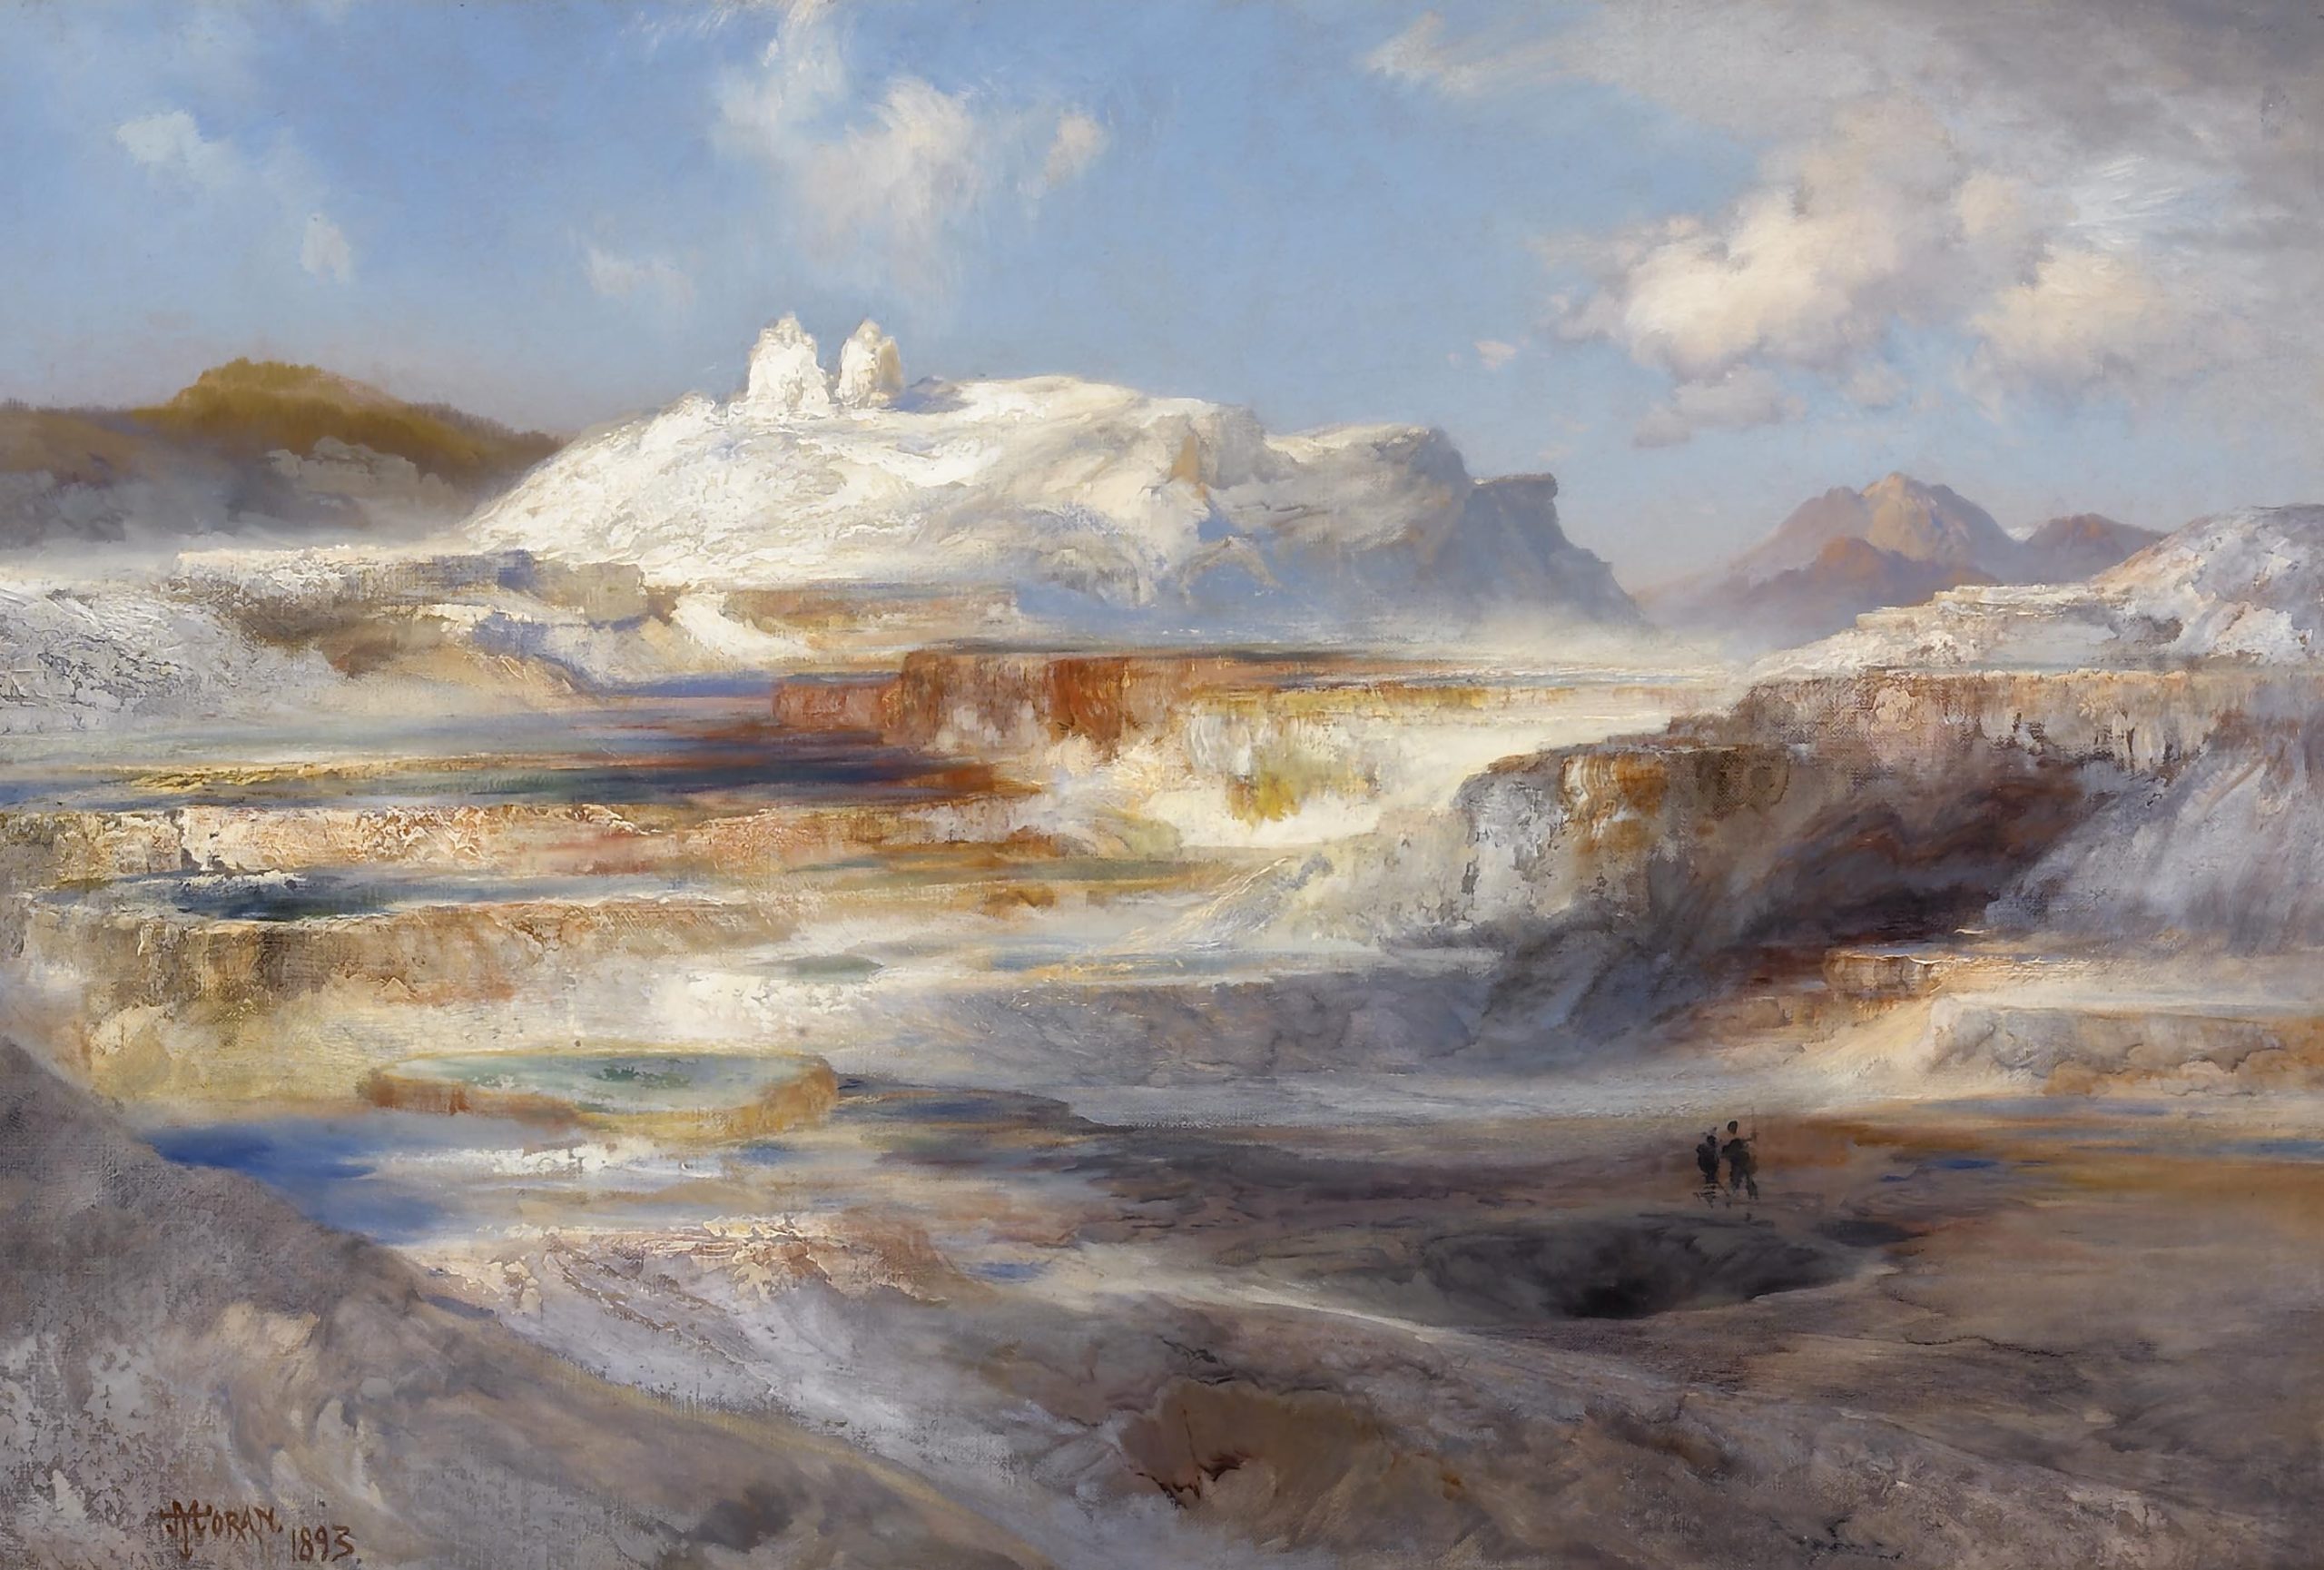 

											</b>

											<em>
												Lure of the West: Celebrating 50 Years of Gerald Peters Gallery  </em> 

											<h4>
												New York: April 29 - May 27, 2022											</h4>

		                																																<i>Thomas Moran, Jupiter Terrace, Yellowstone,</i>  
																																								1893, 
																																								oil on canvas, 
																																								19 ½ x 29 ½ inches 
																								
		                				